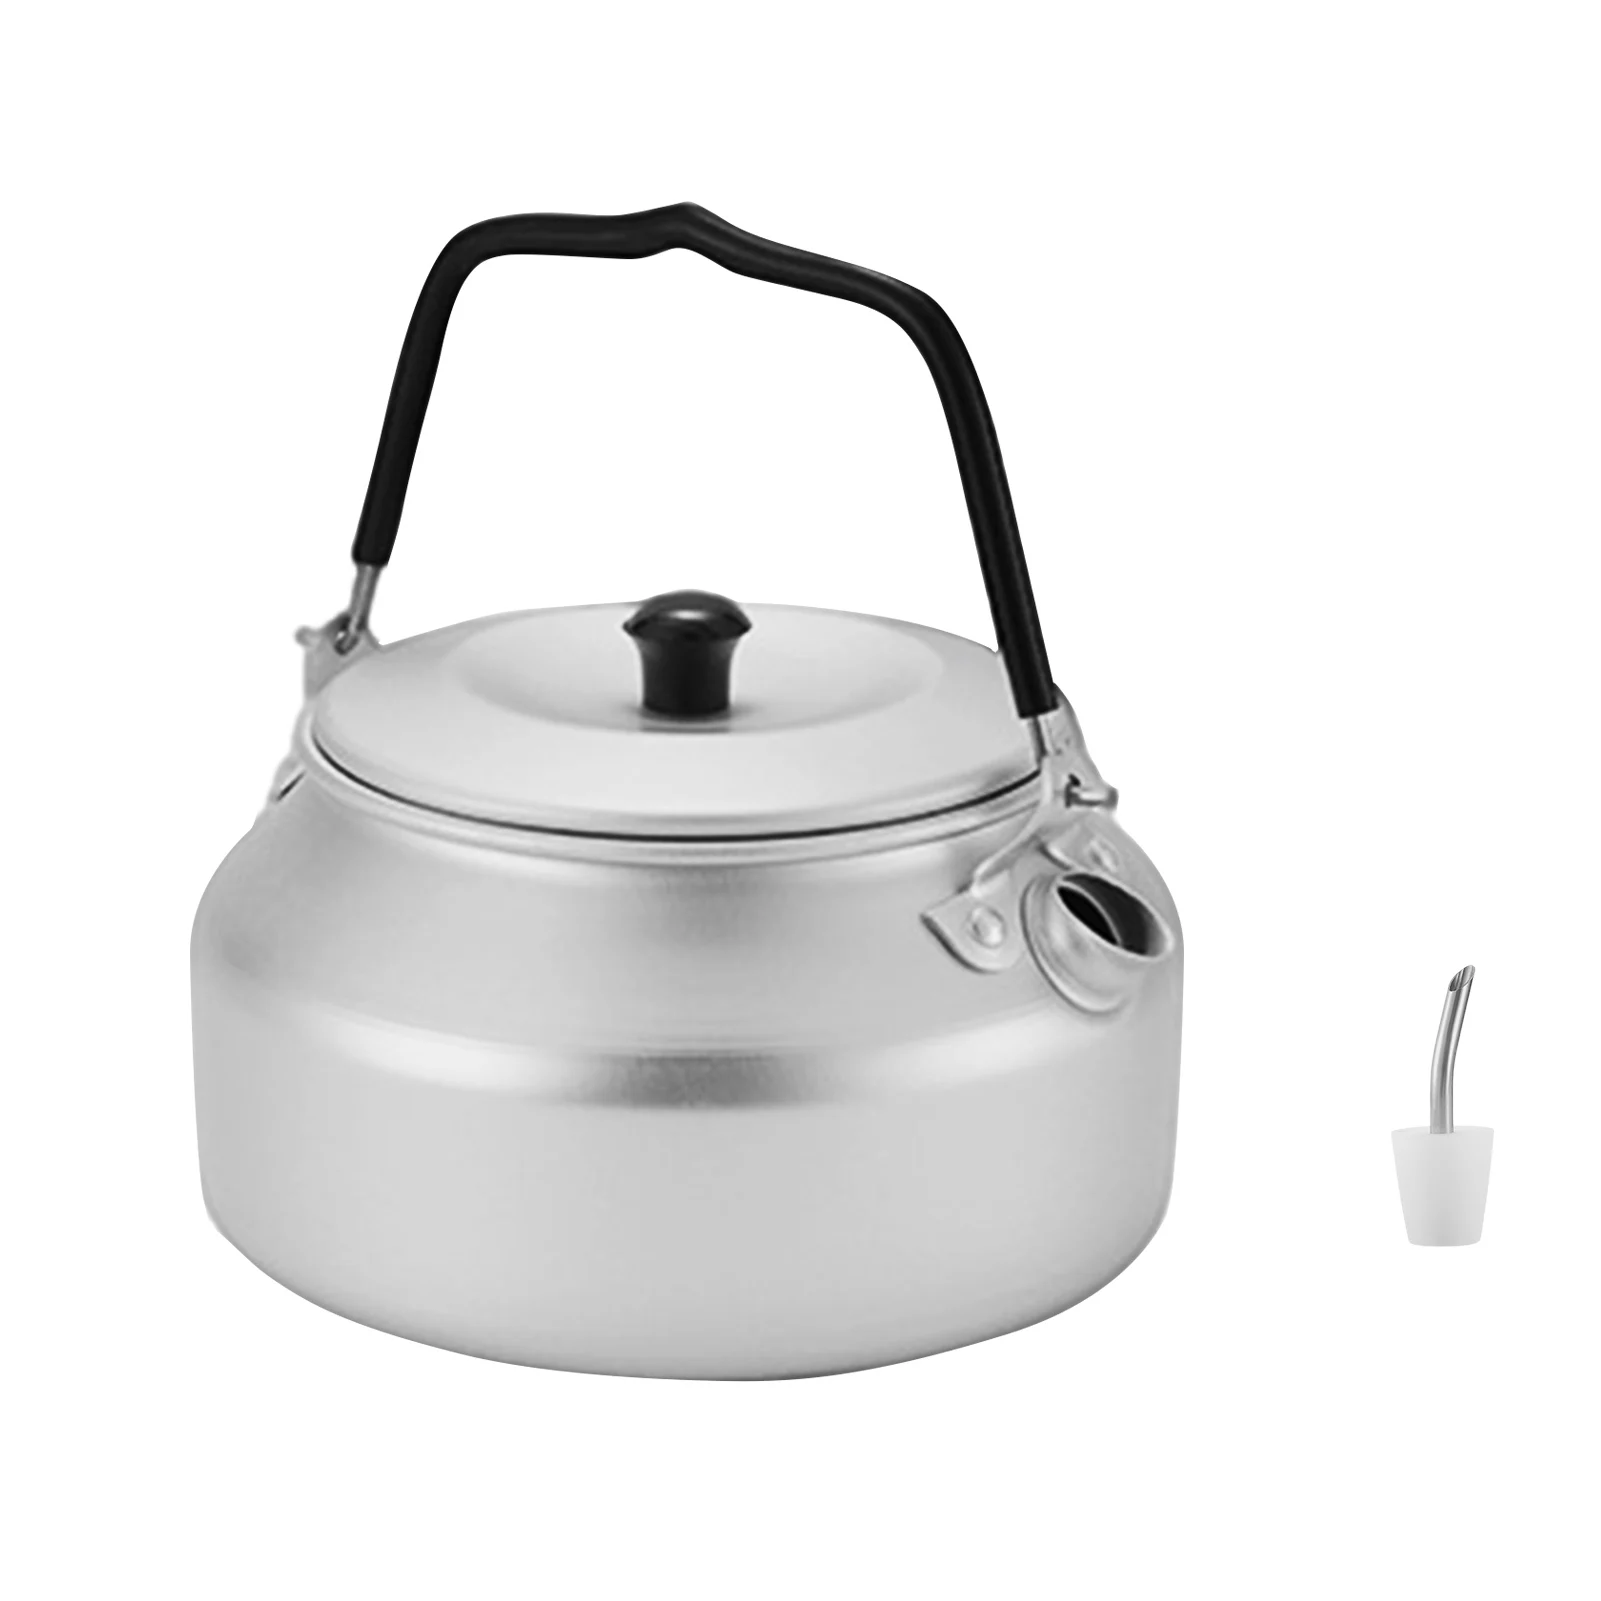 

Outdoor Camping Kettle Stainless Steel Cookware With Anti-Scalding Handle Portable Ultra-Light Outdoor Hiking Camping Picnicking